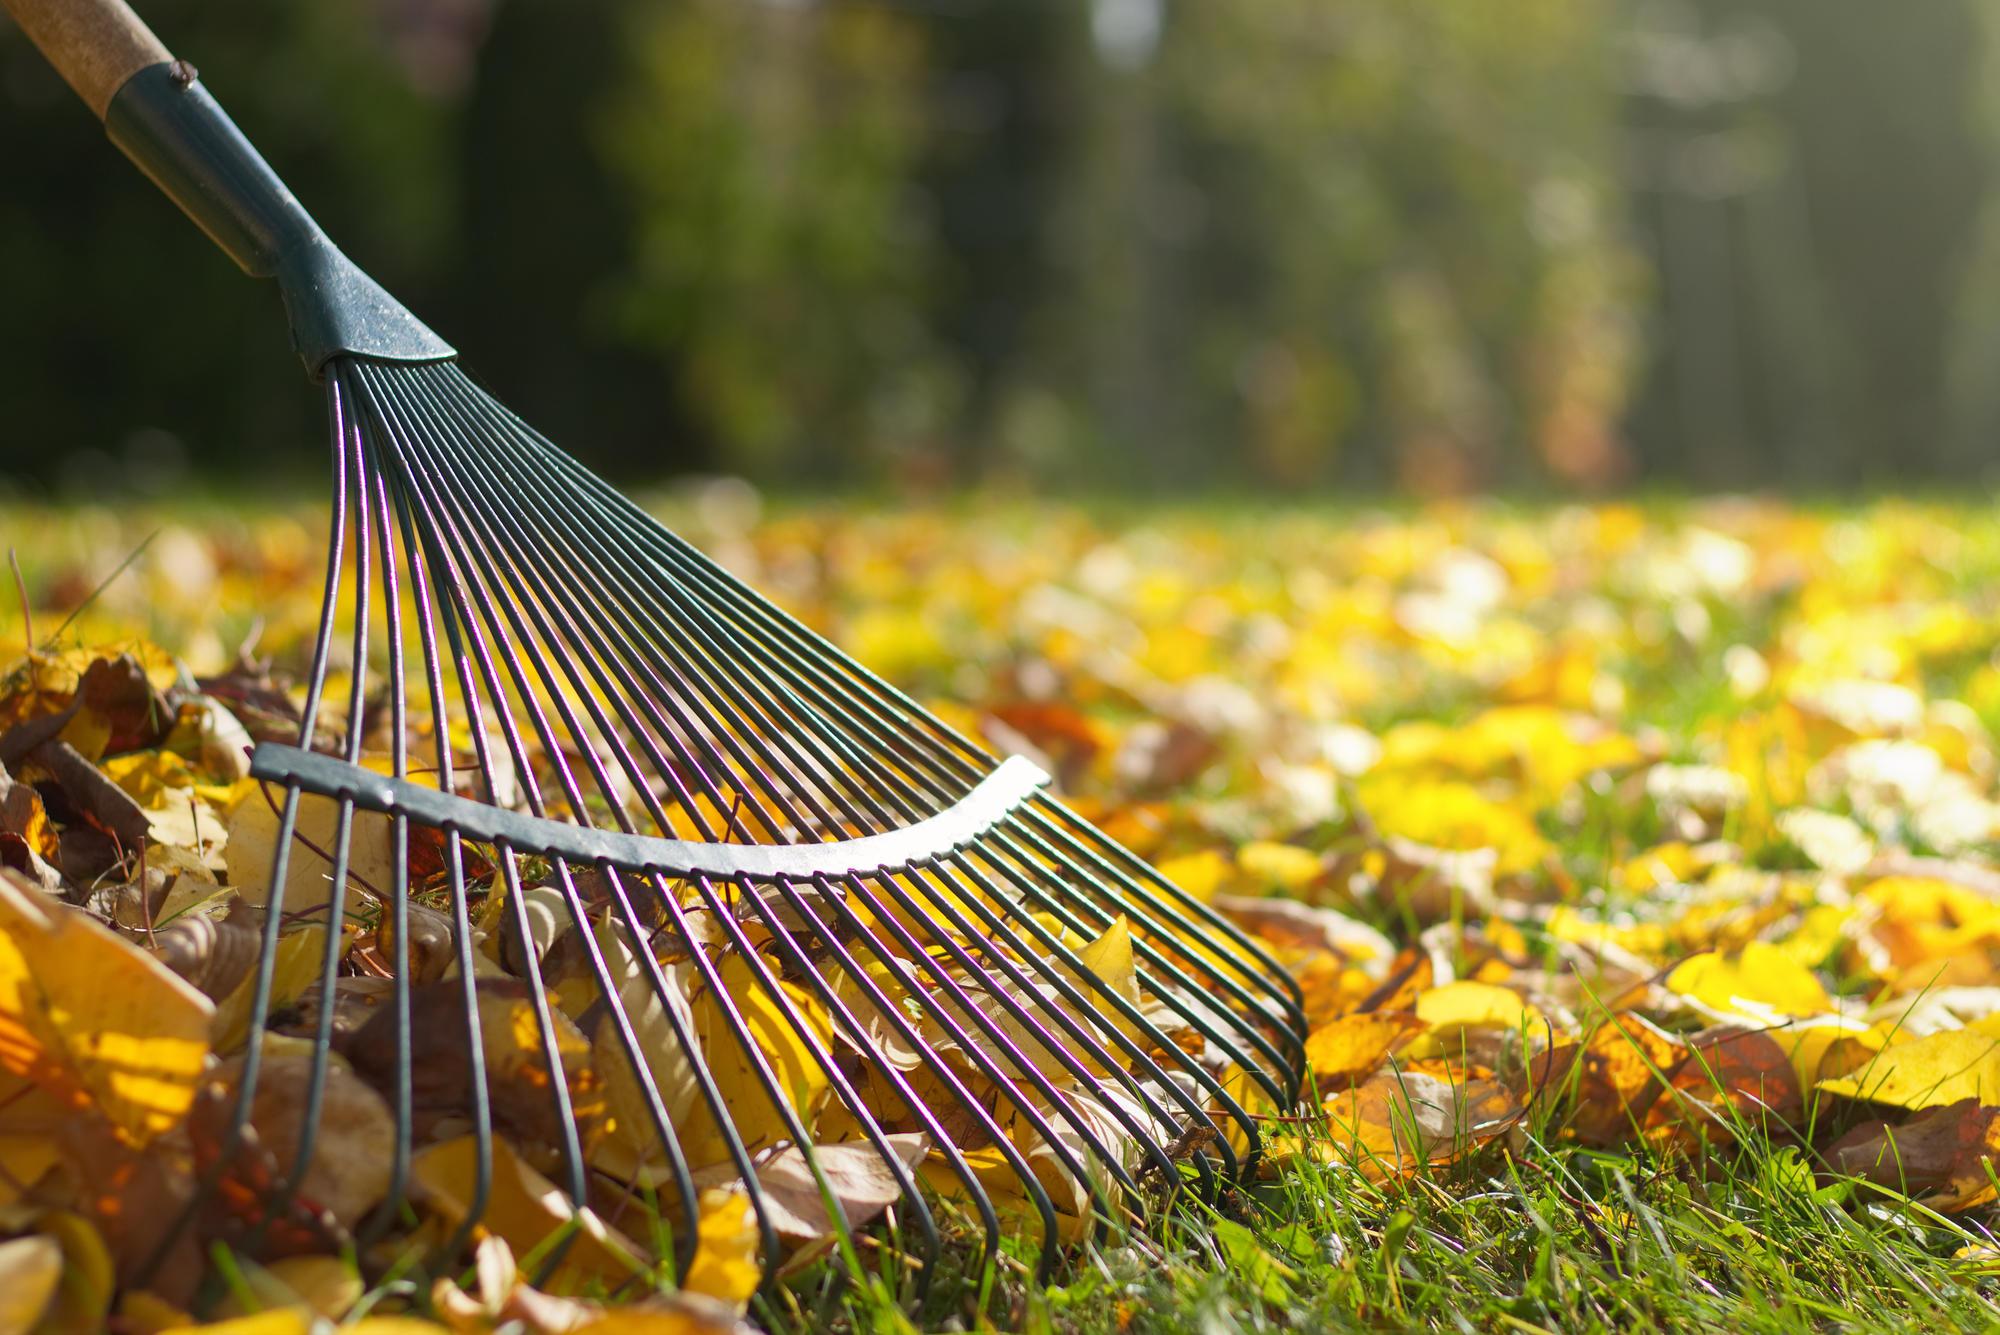 A rake in a pile of leaves.